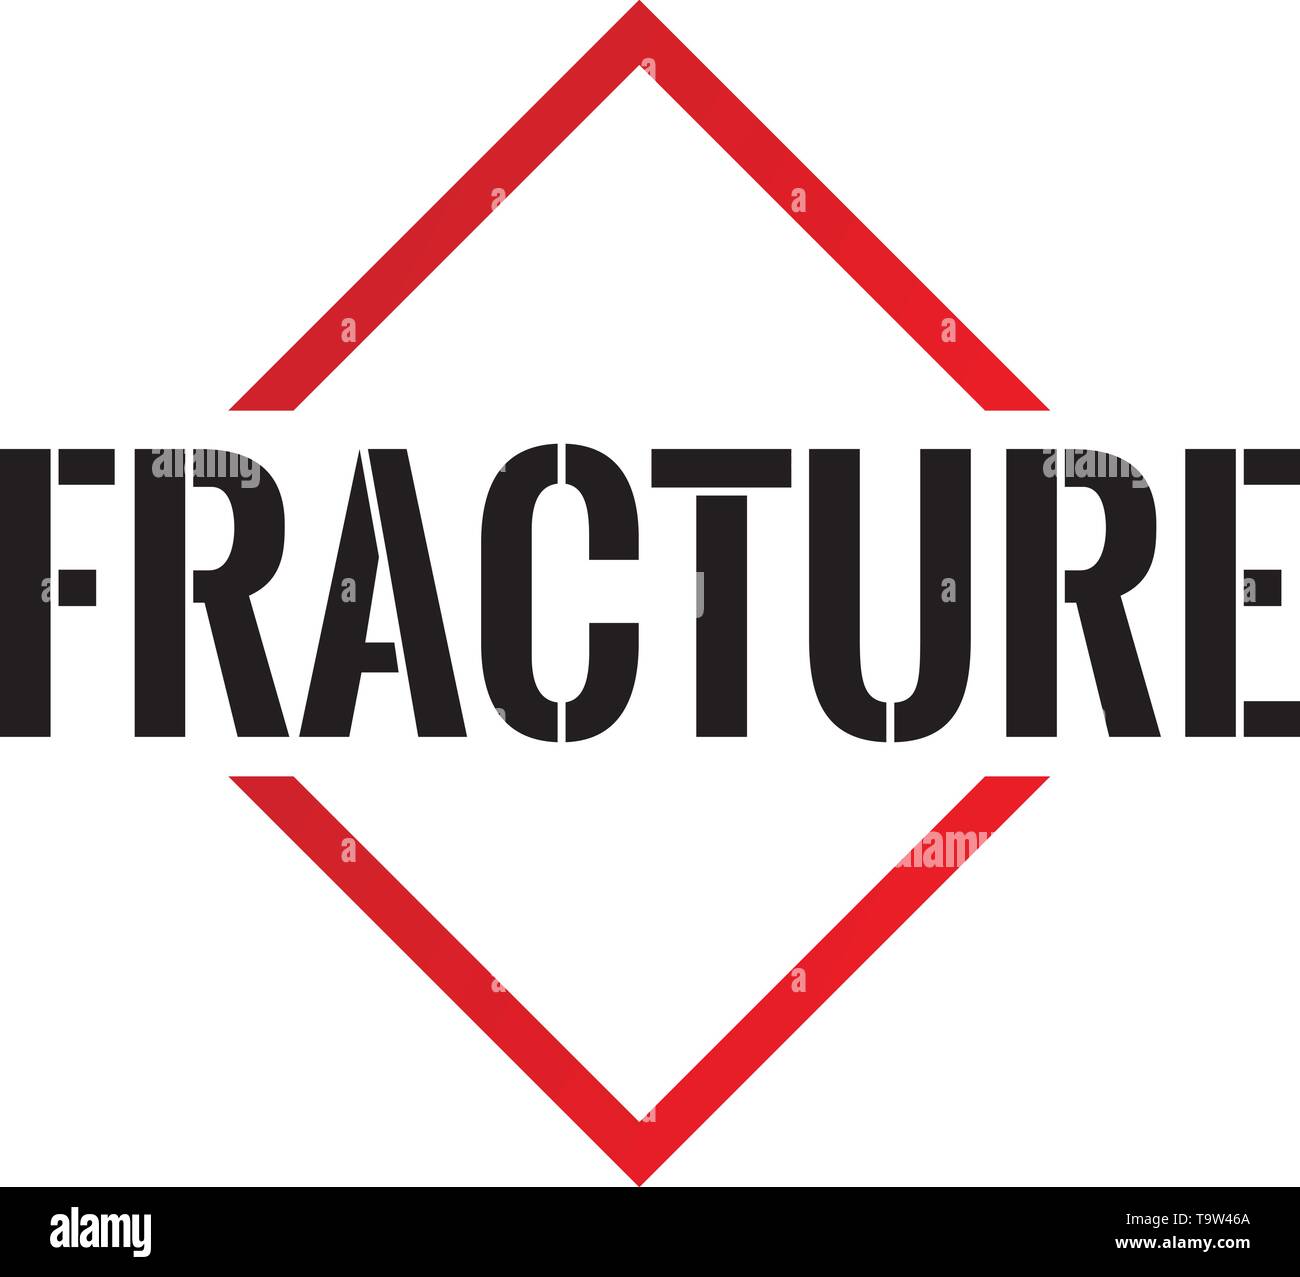 Fracture Triangle or pyramid line art vector icon Stock Vector